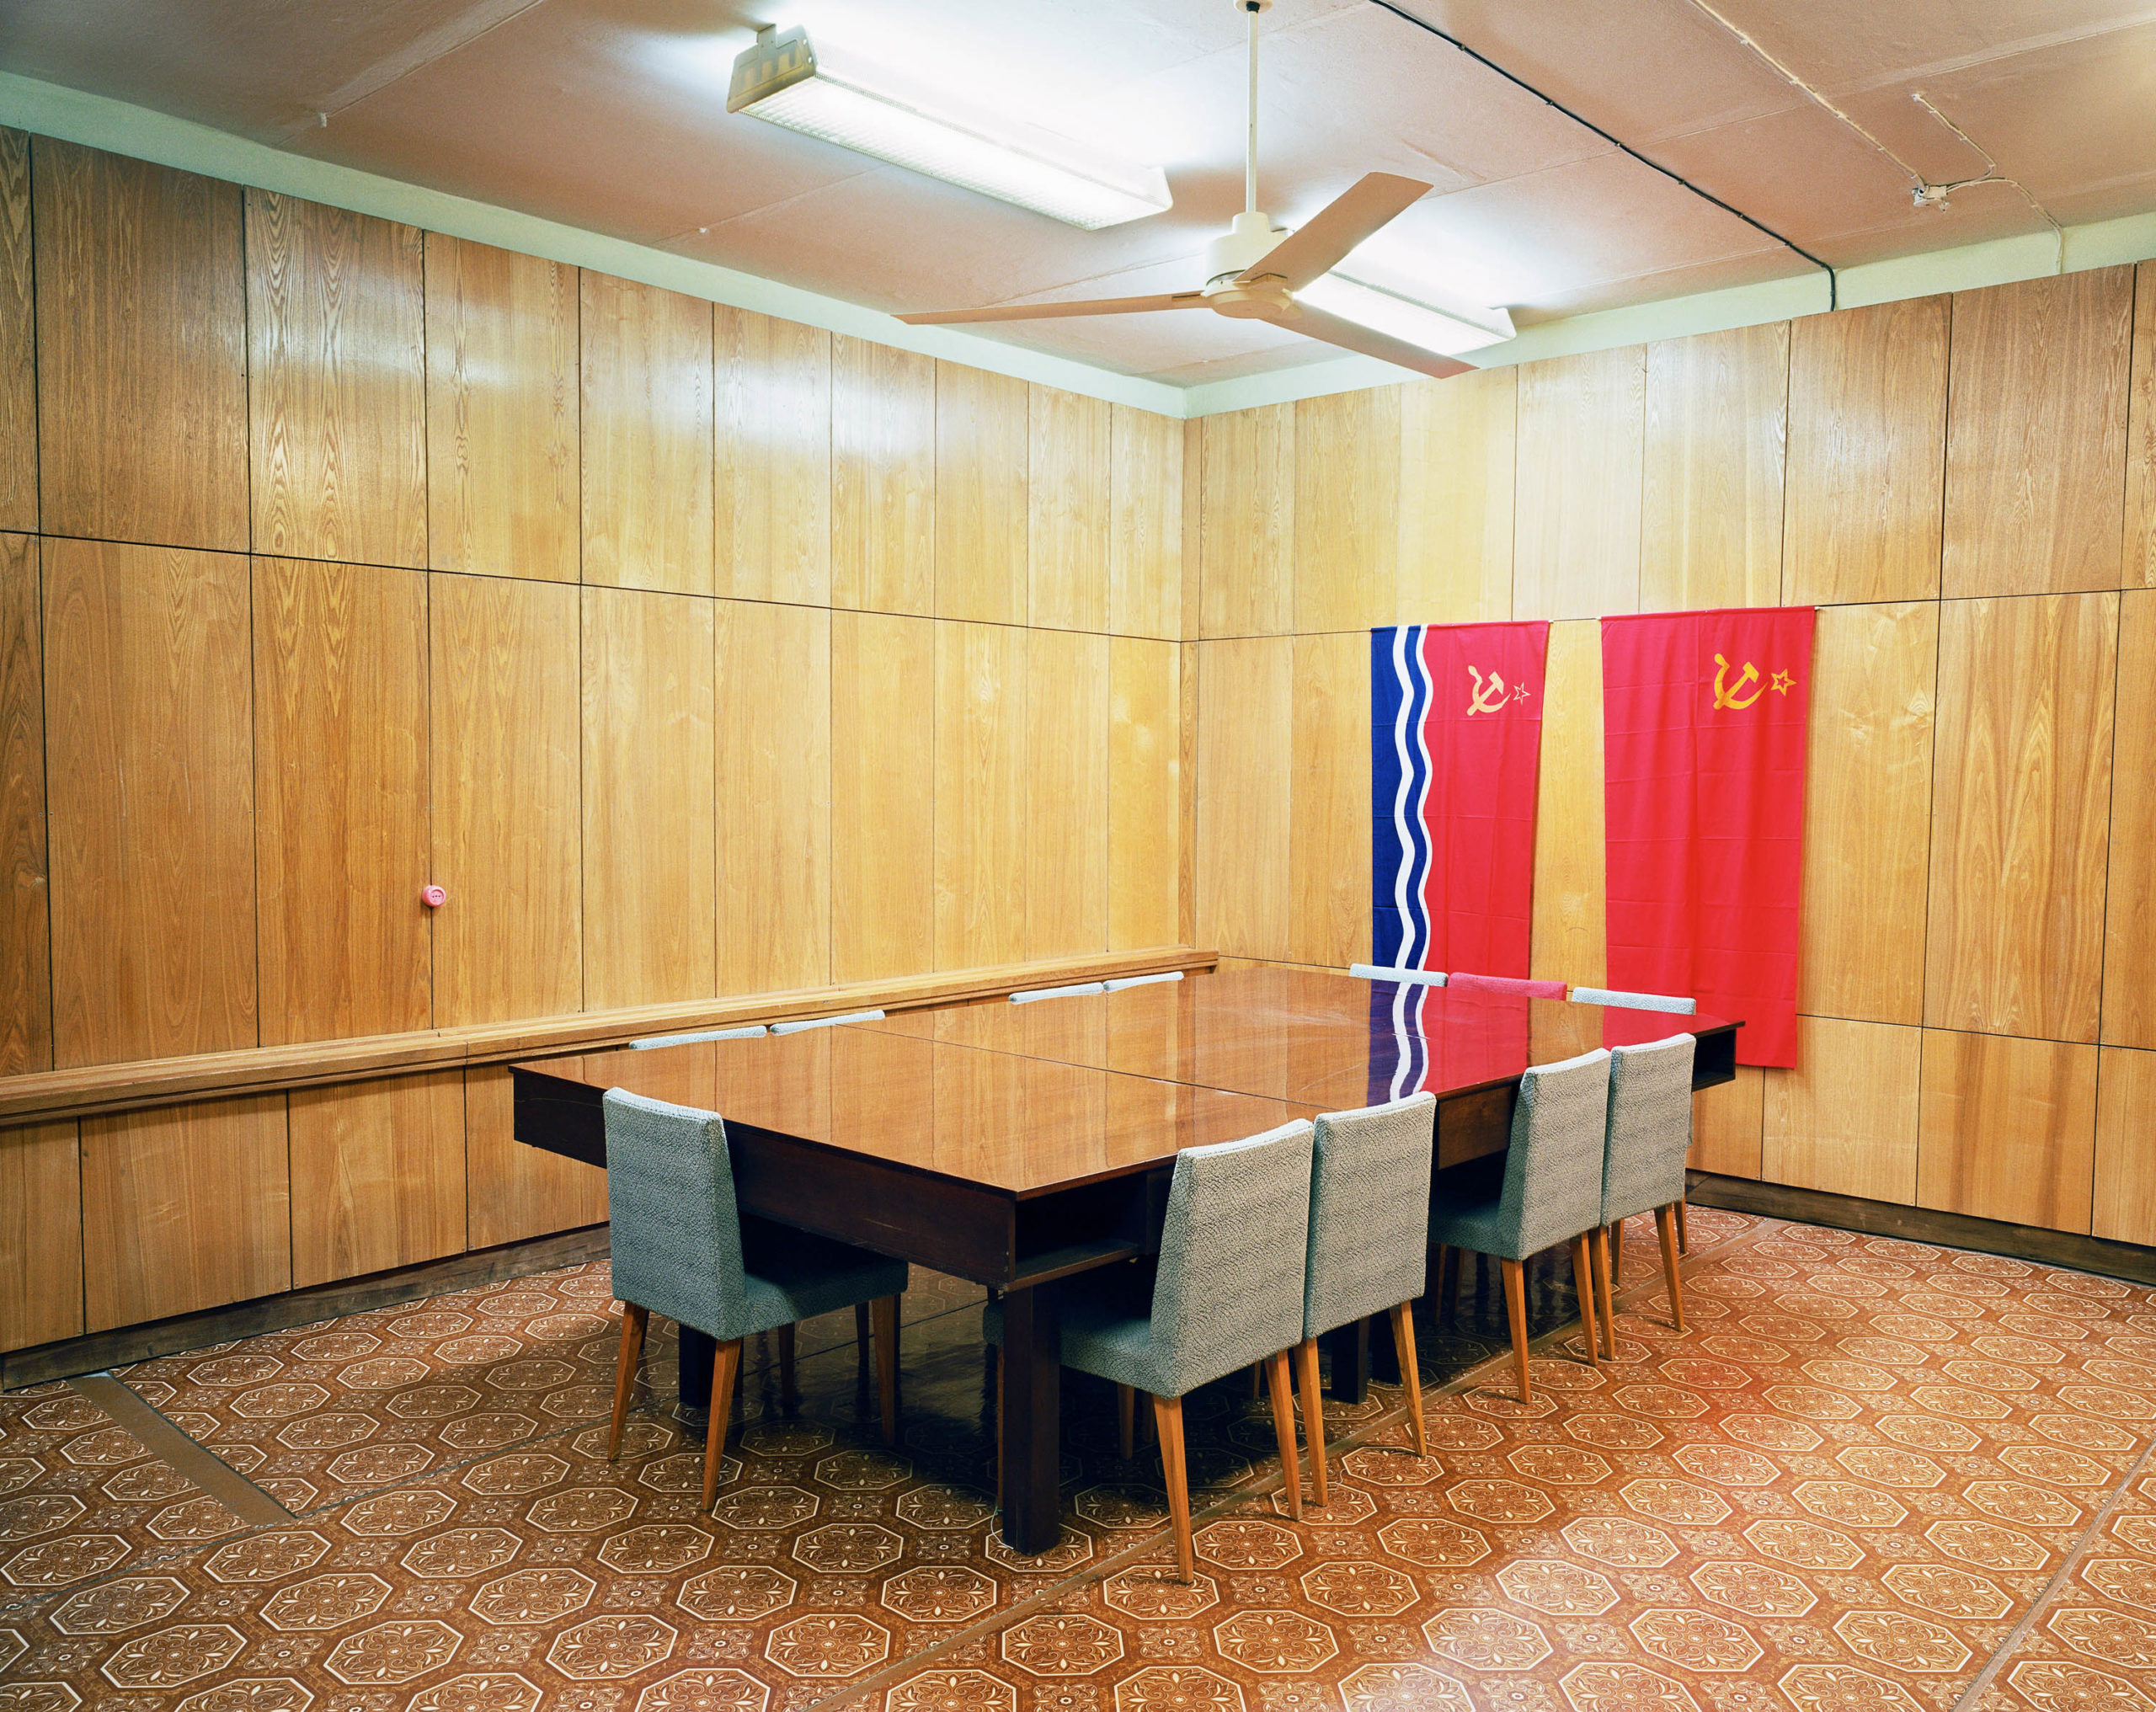 Latvia. Underground Soviet nuclear bunker for the regional government